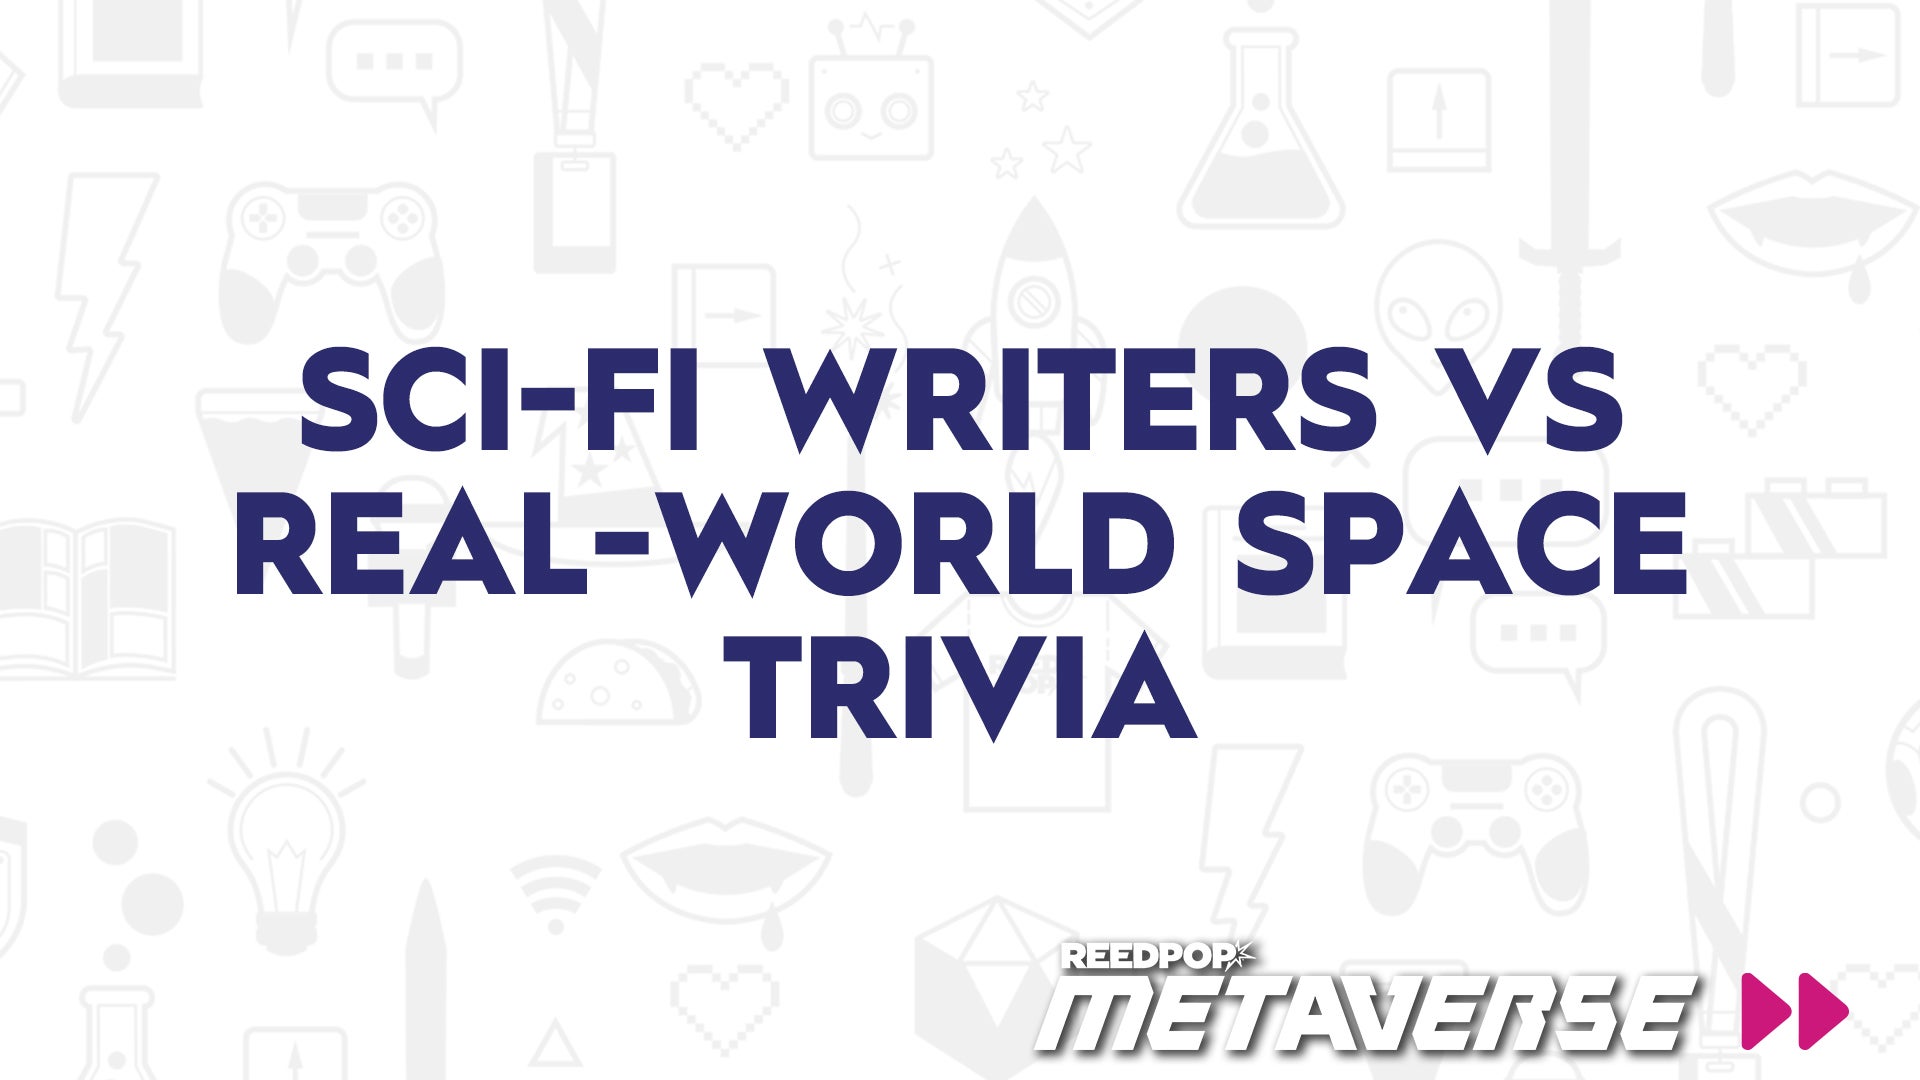 Image for SciFi Writers vs Real-World Space Trivia